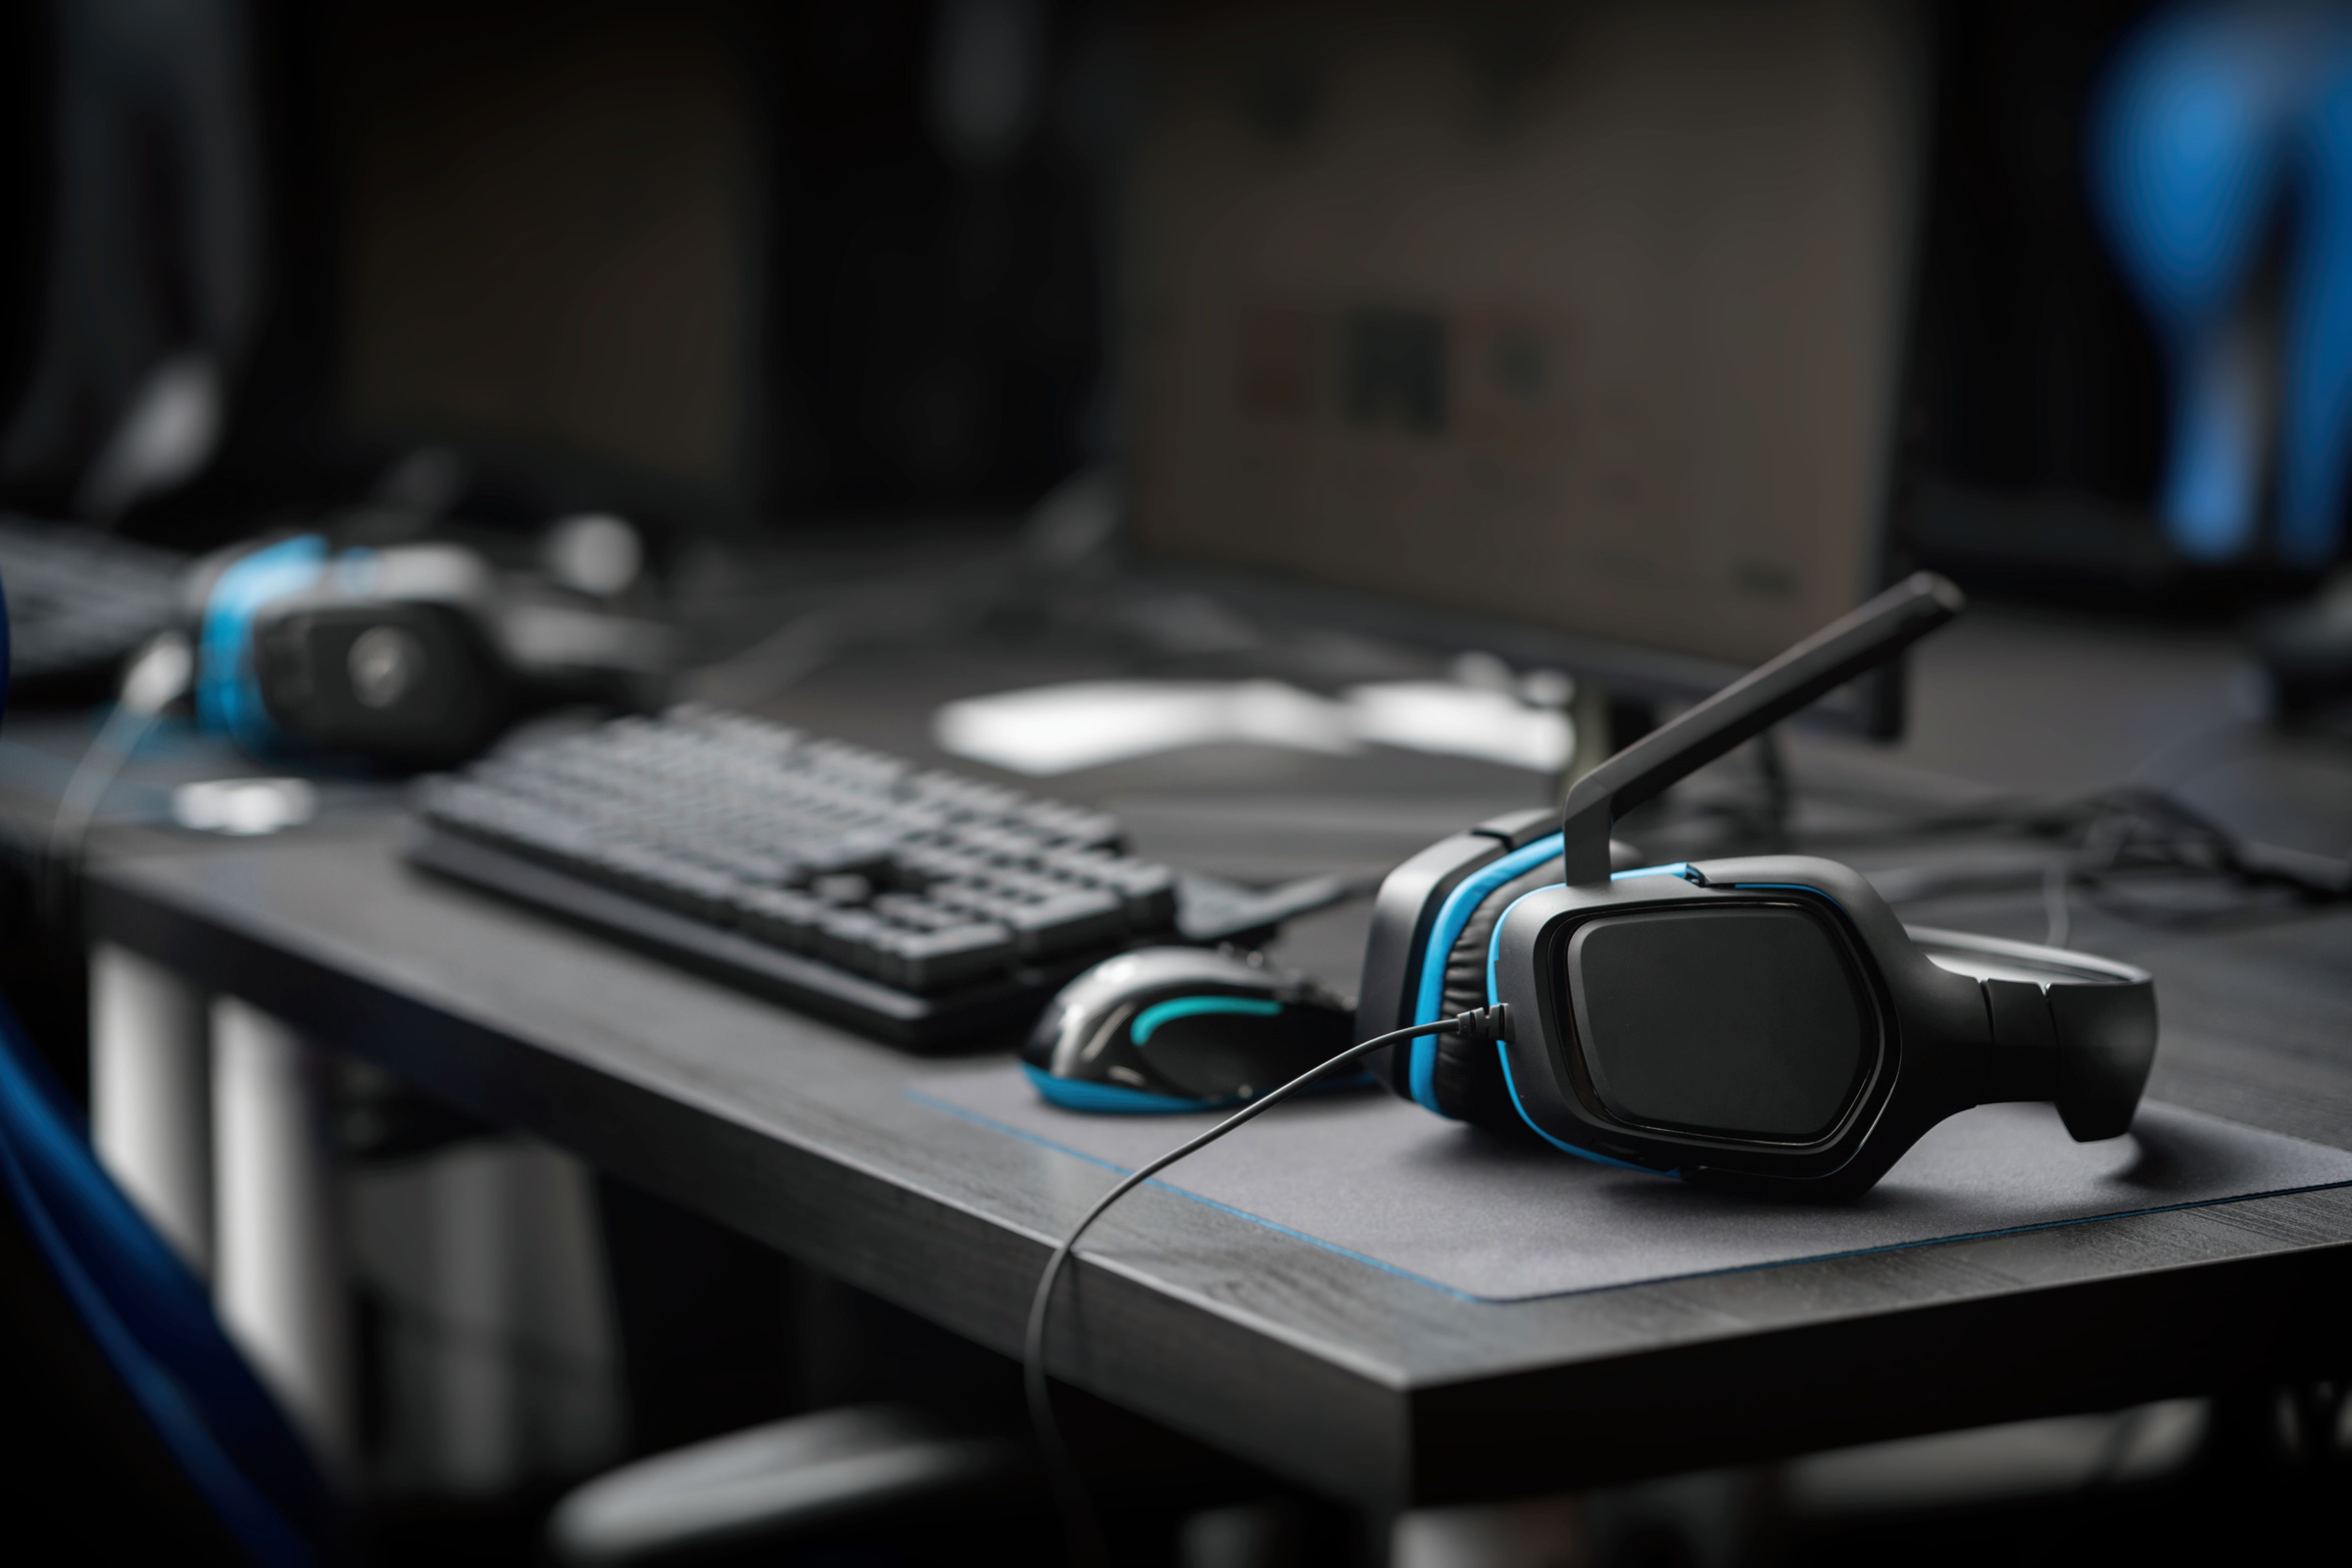 Mice, keyboards and headsets inspired by e-sports